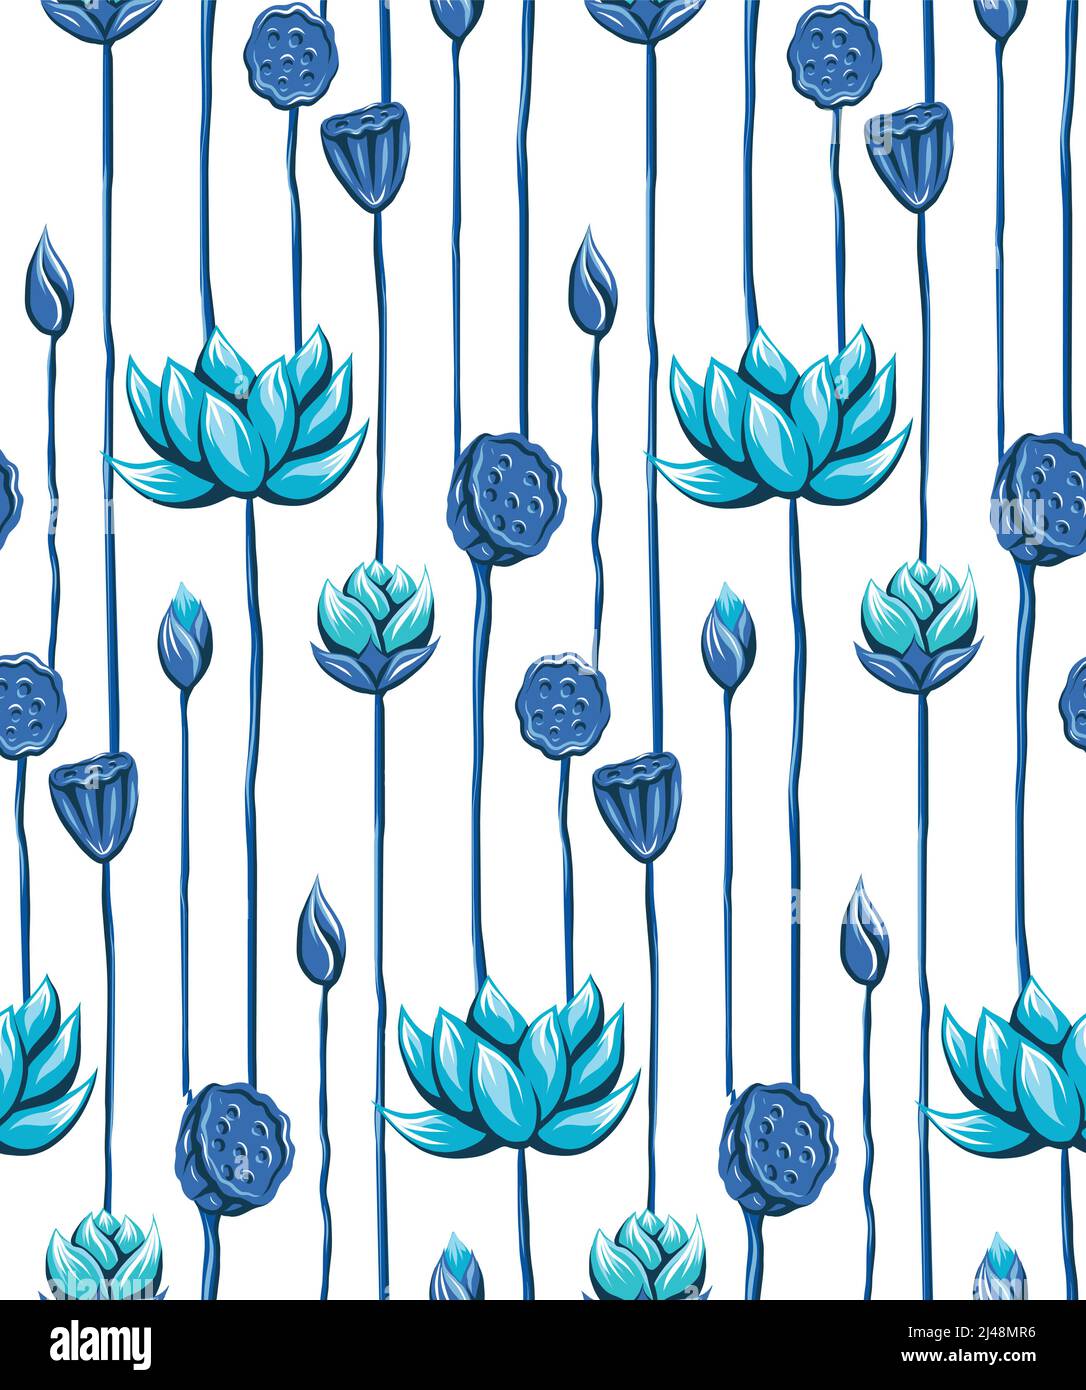 Seamless vector pattern with blue lotuses and stems. Botanical texture with buds and flowers on a white background. Fabric swatch with water lilies Stock Vector